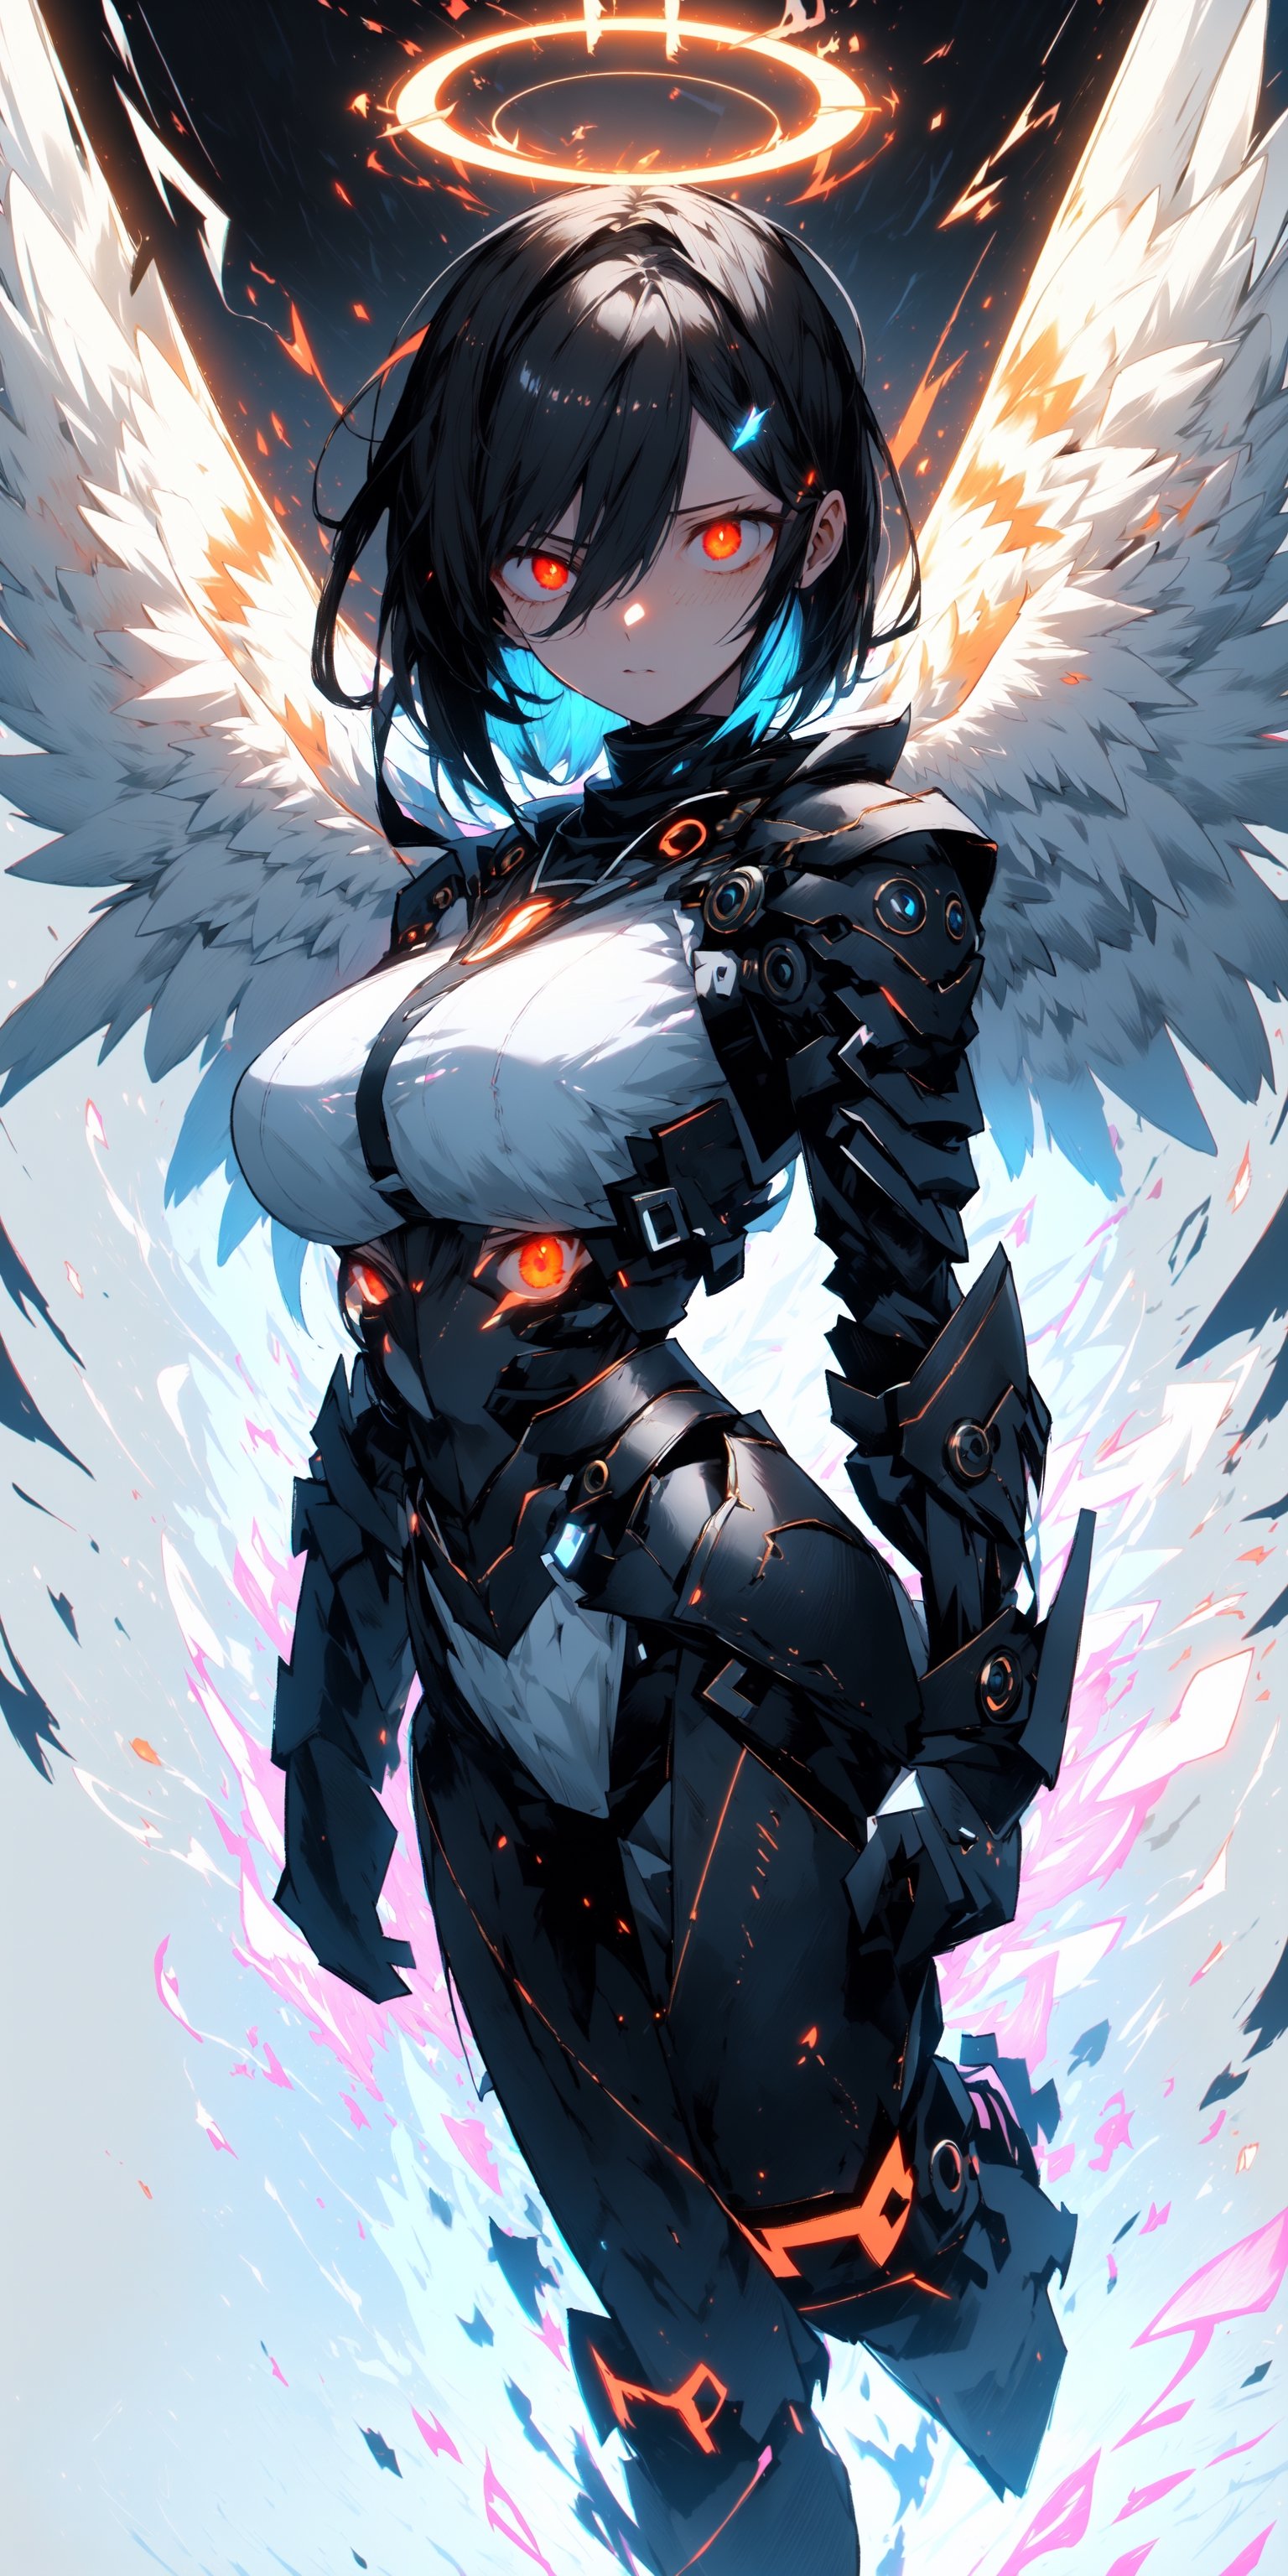 (1girls:1.4), (holy_background:1.4), (simple_background:1.4),

dynamic_angle, tyndall effect, volumetric lighting, looking_at_viewer, full_body, bright_theme, niji, clear_lines

short-hair, black-hair, Pale_skin, big_breasts, sharp_face, multicolored_eye, angelic angel, eyeshadow, eyeliner, Eyelash, from_side, expressive eyes, perfect glowing_eyes, cyberpunk, mecha armor, determined_face, damaged, glowing, aura, energy, beam, white plugsuits, bright exoskeleton suit, tall, halo, holyness, machine wings

(best quality:1.4), (highres:1.4), (high_resolution:1.4), (masterpiece:1.4), sidelighting, super detail, hyper detail, intricate_details, ligne_claire, perpect face,midjourney